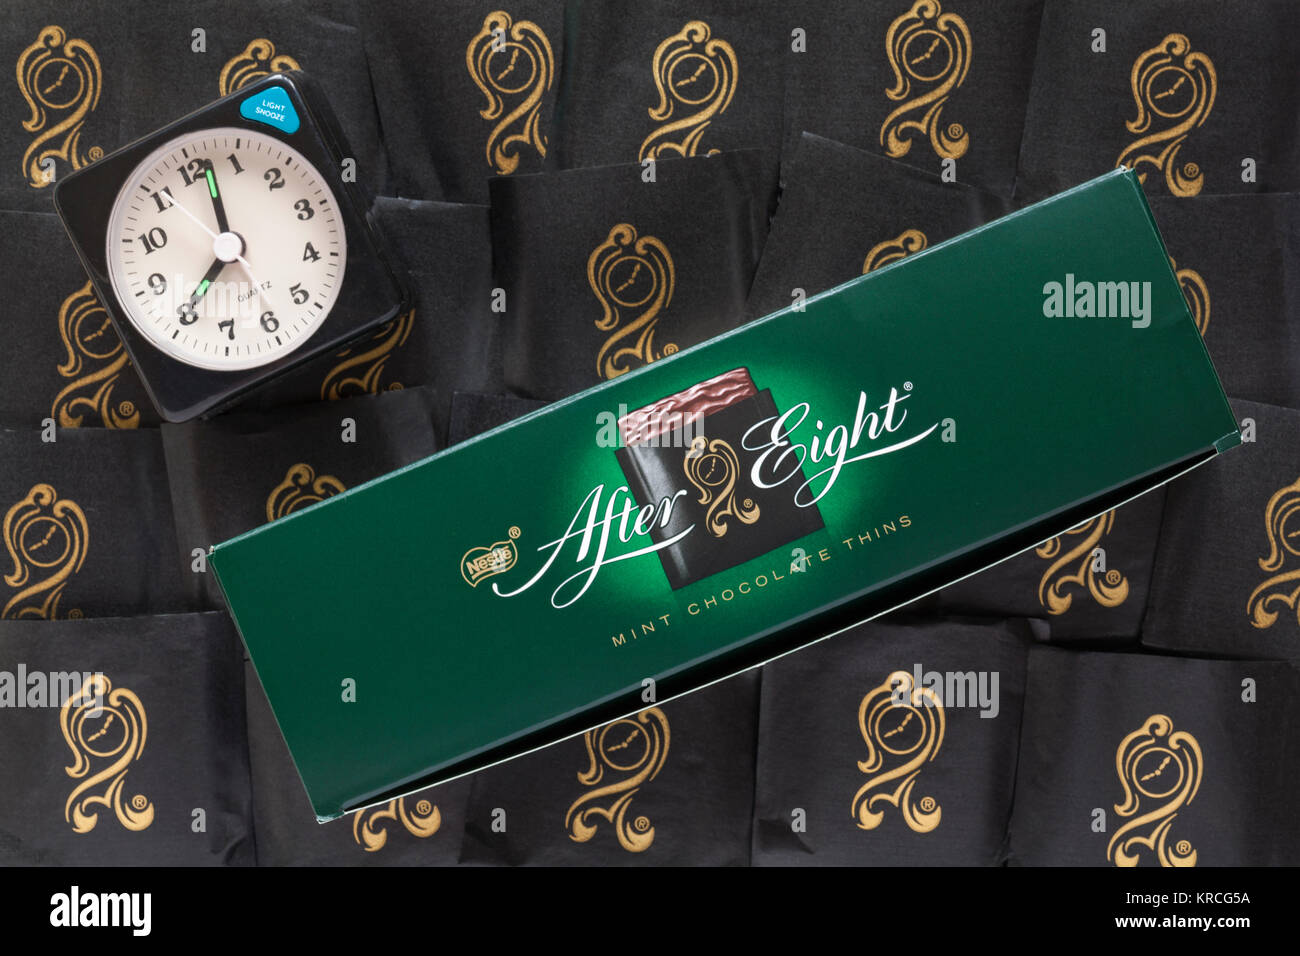 After Eight mint chocolate thins chocolates with alarm clock showing time as just past eight o'clock Stock Photo